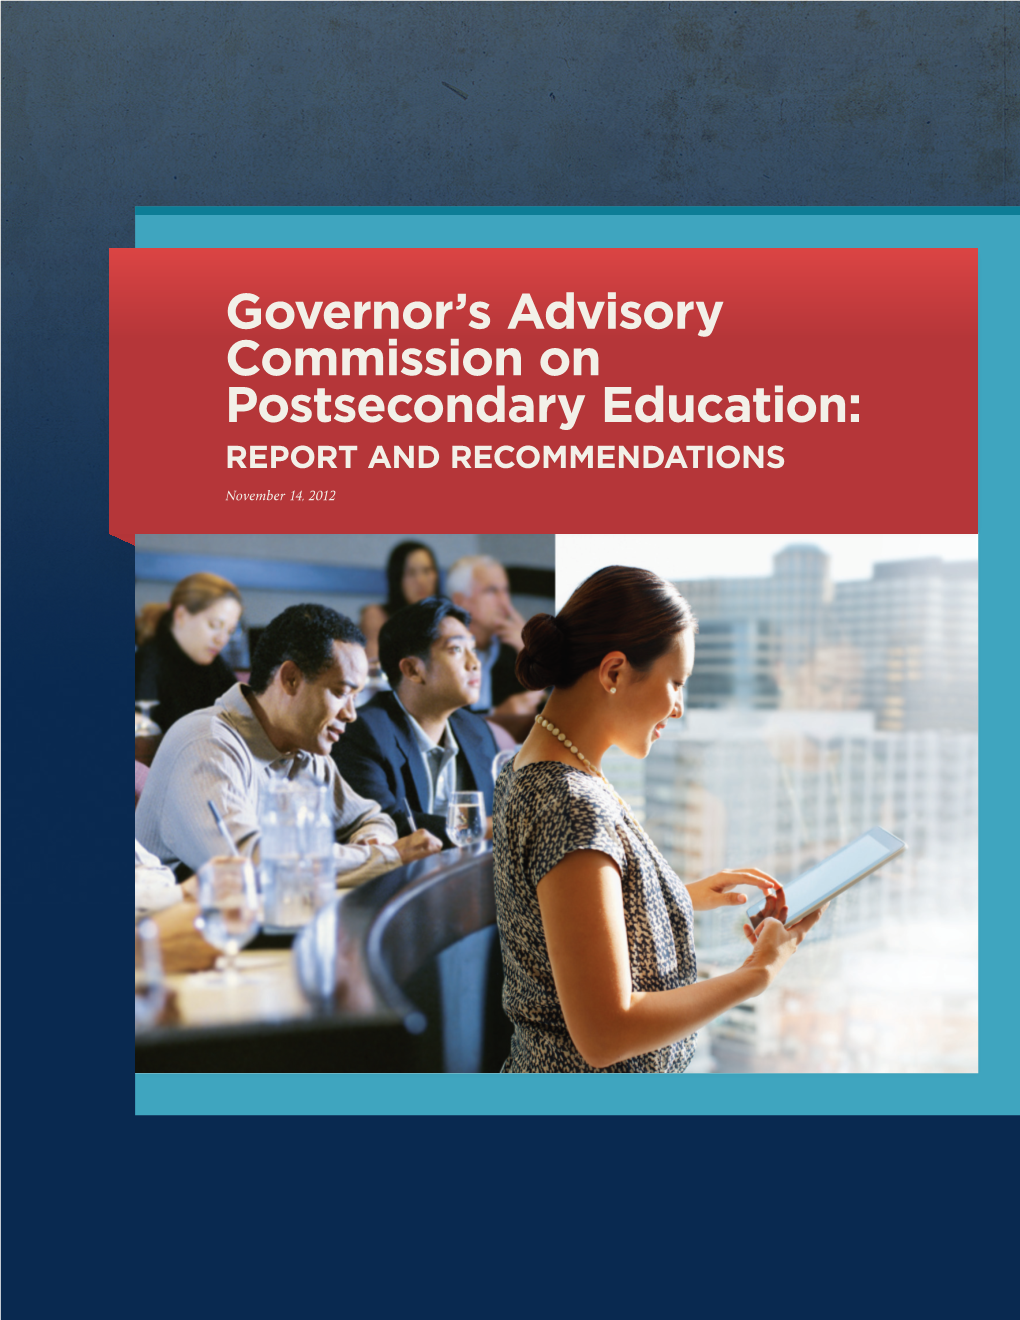 Governor's Advisory Commission on Postsecondary Education